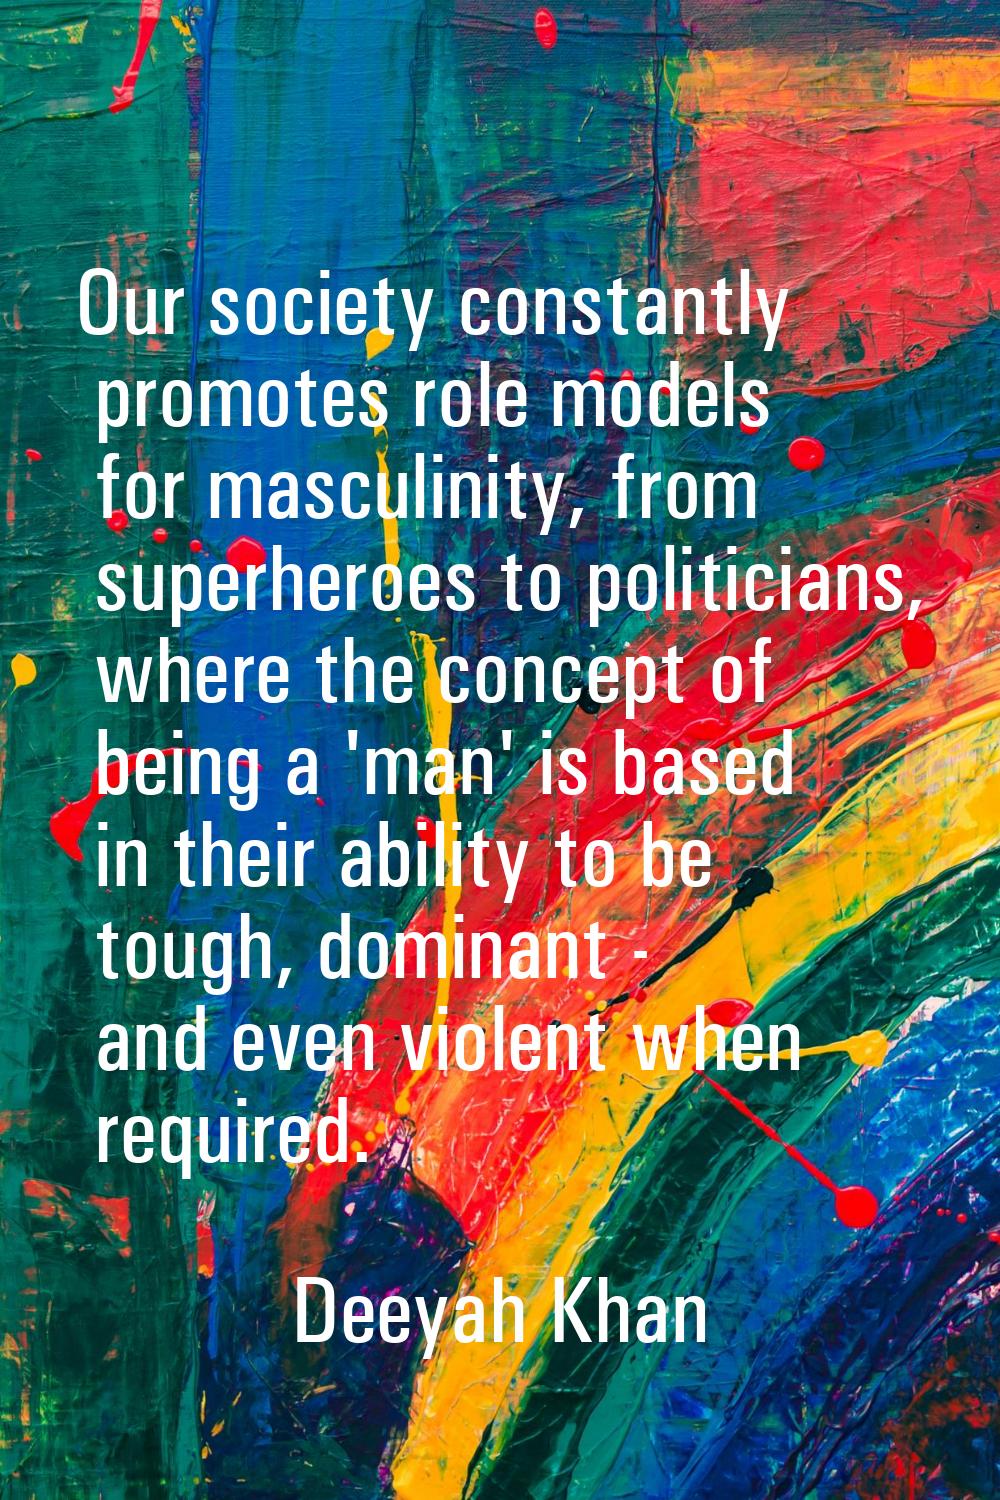 Our society constantly promotes role models for masculinity, from superheroes to politicians, where